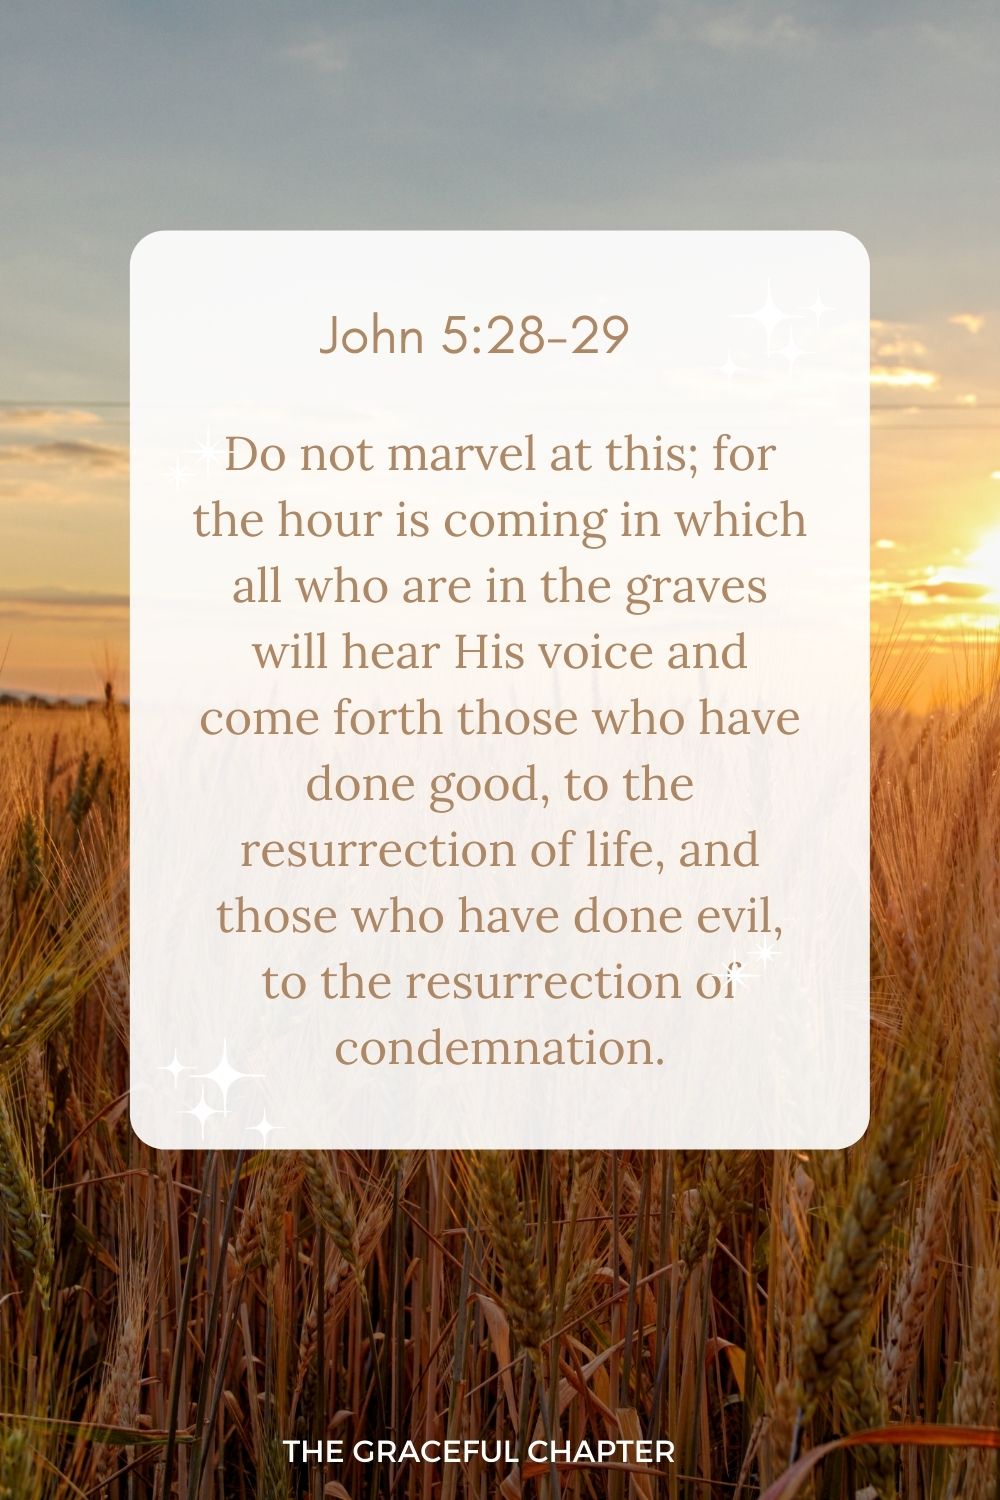 Do not marvel at this; for the hour is coming in which all who are in the graves will hear His voice and come forth those who have done good, to the resurrection of life, and those who have done evil, to the resurrection of condemnation. John 5:28-29